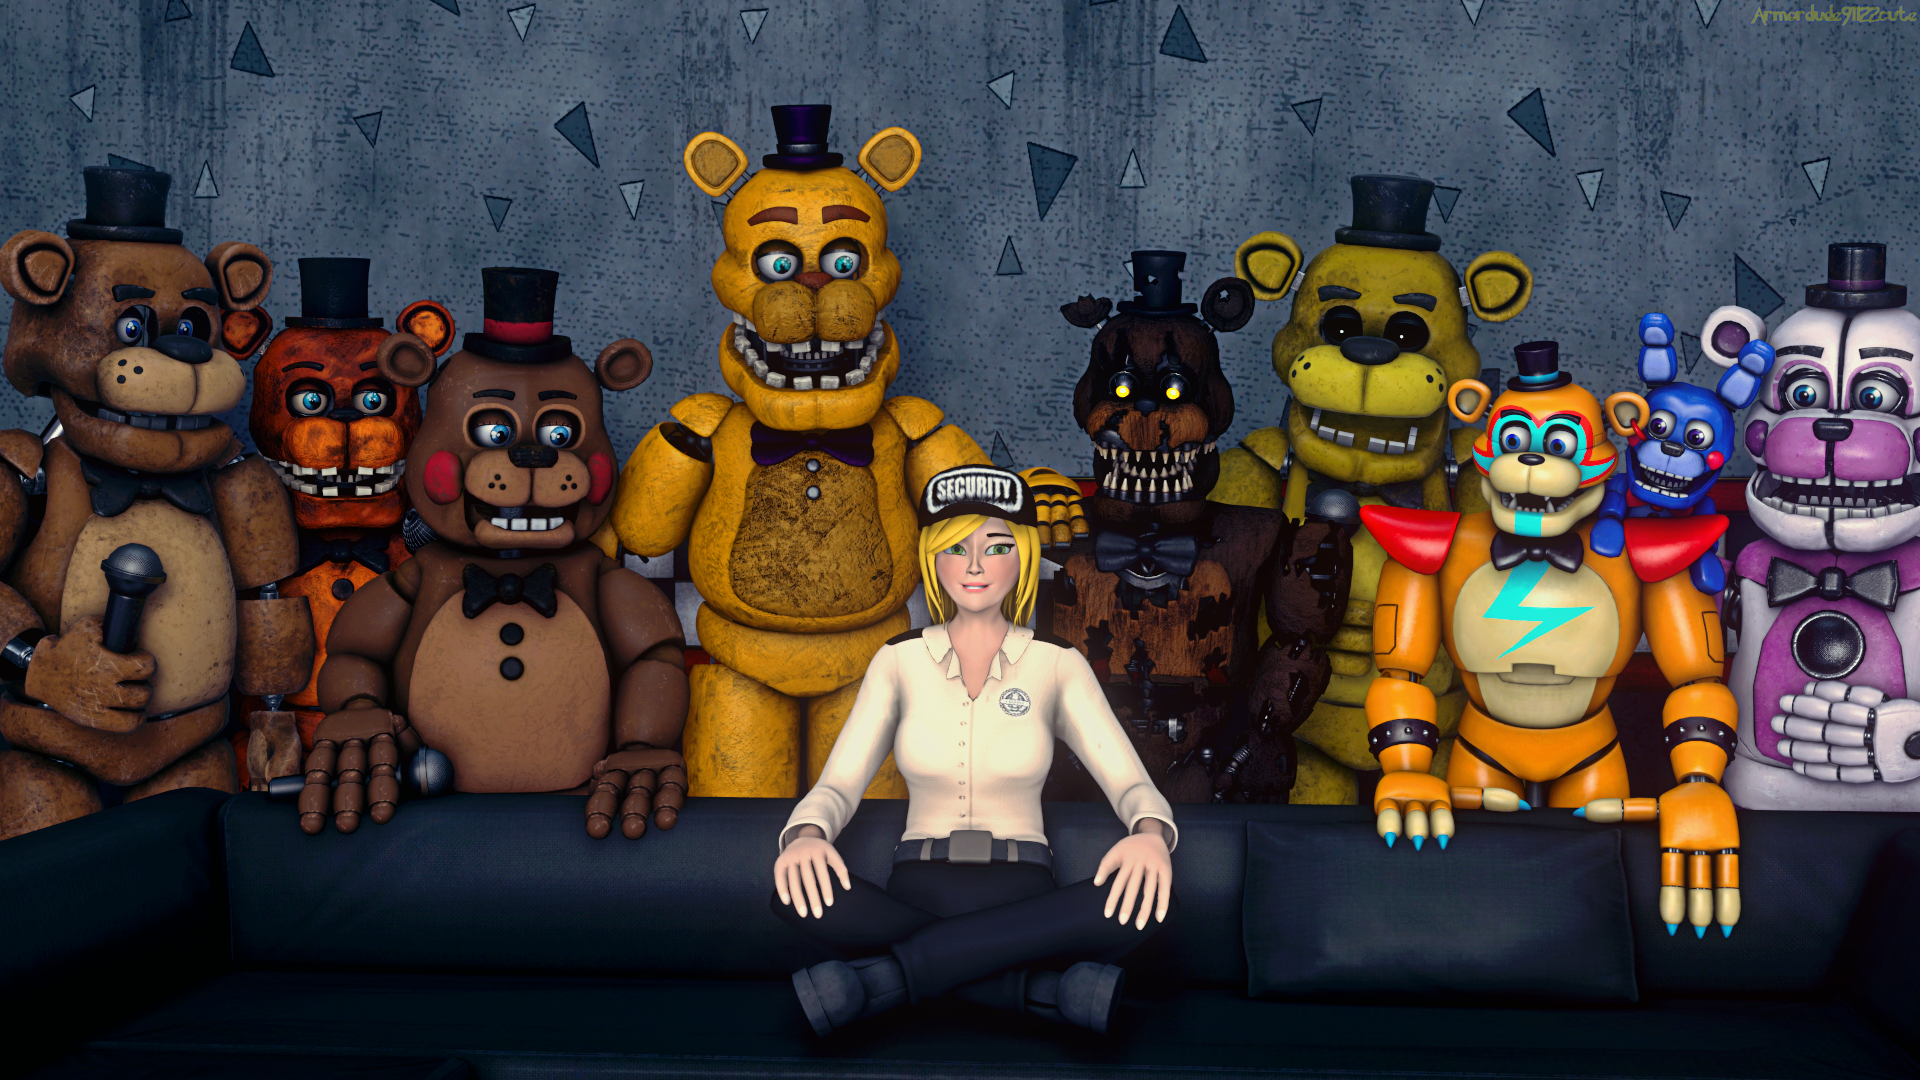 Five Nights at Freddy's 3[???] by Christian2099 on DeviantArt